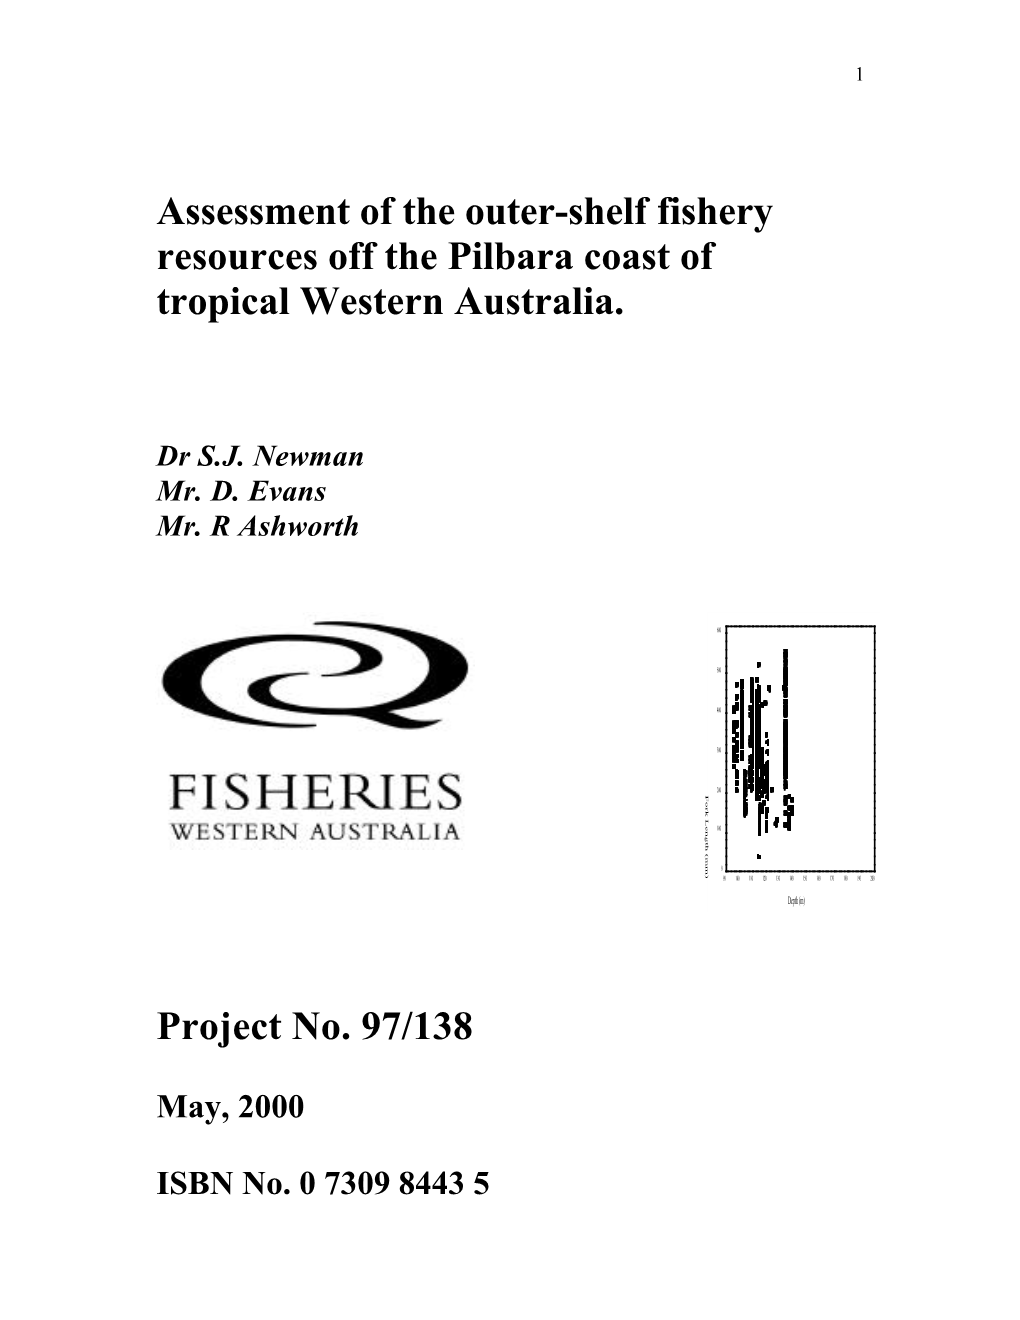 Assessment of the Outer-Shelf Fishery Resources Off the Pilbara Coast of Tropical Western Australia. Project No. 97/138